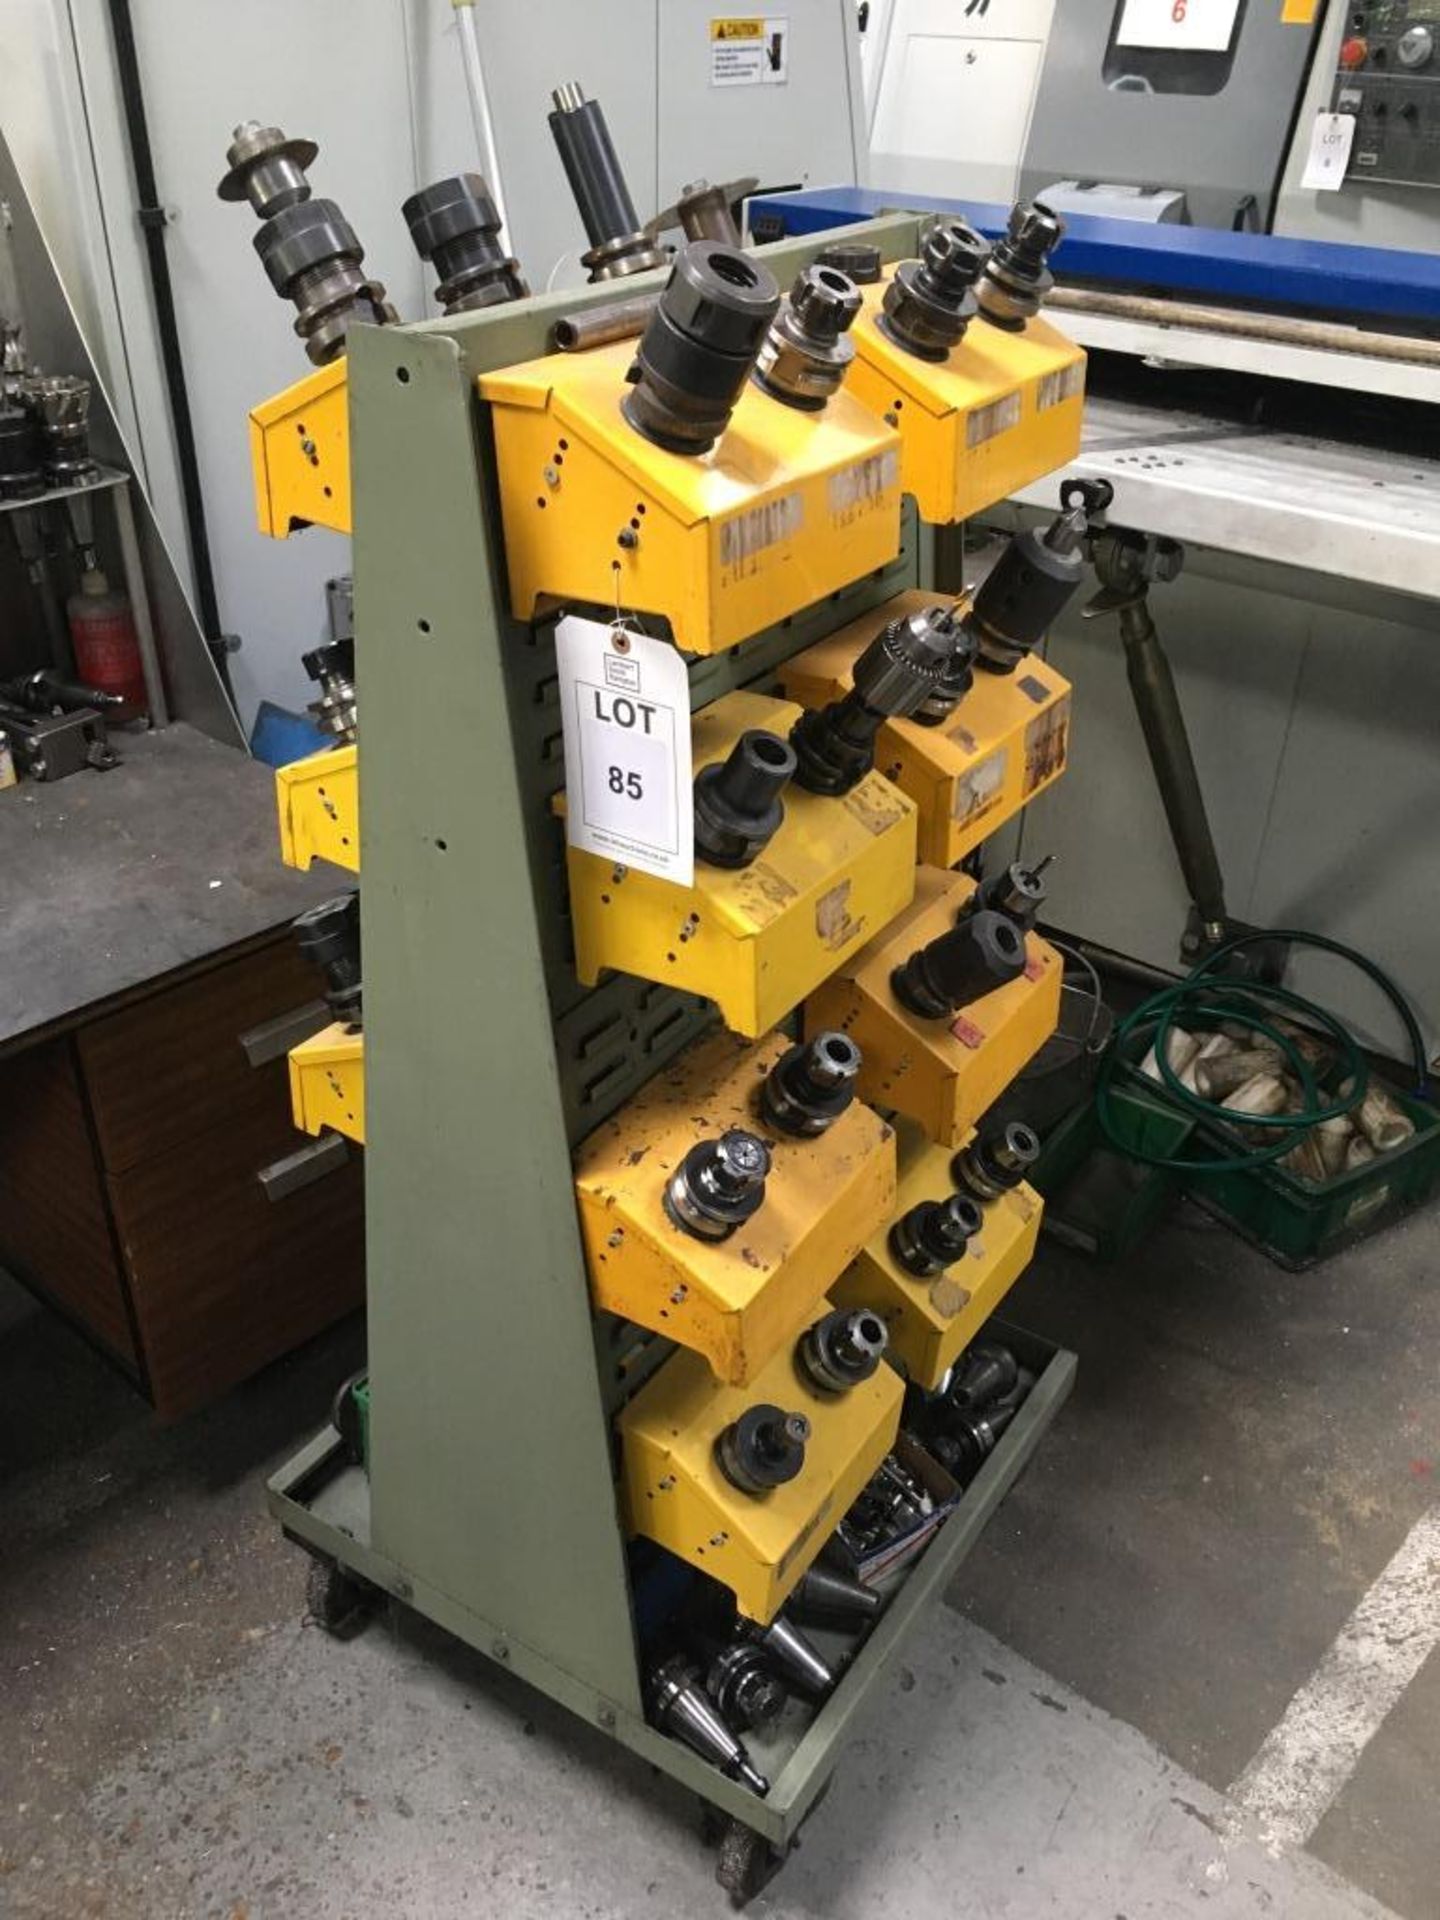 A quantity of CNC tool holders and a mobile unit